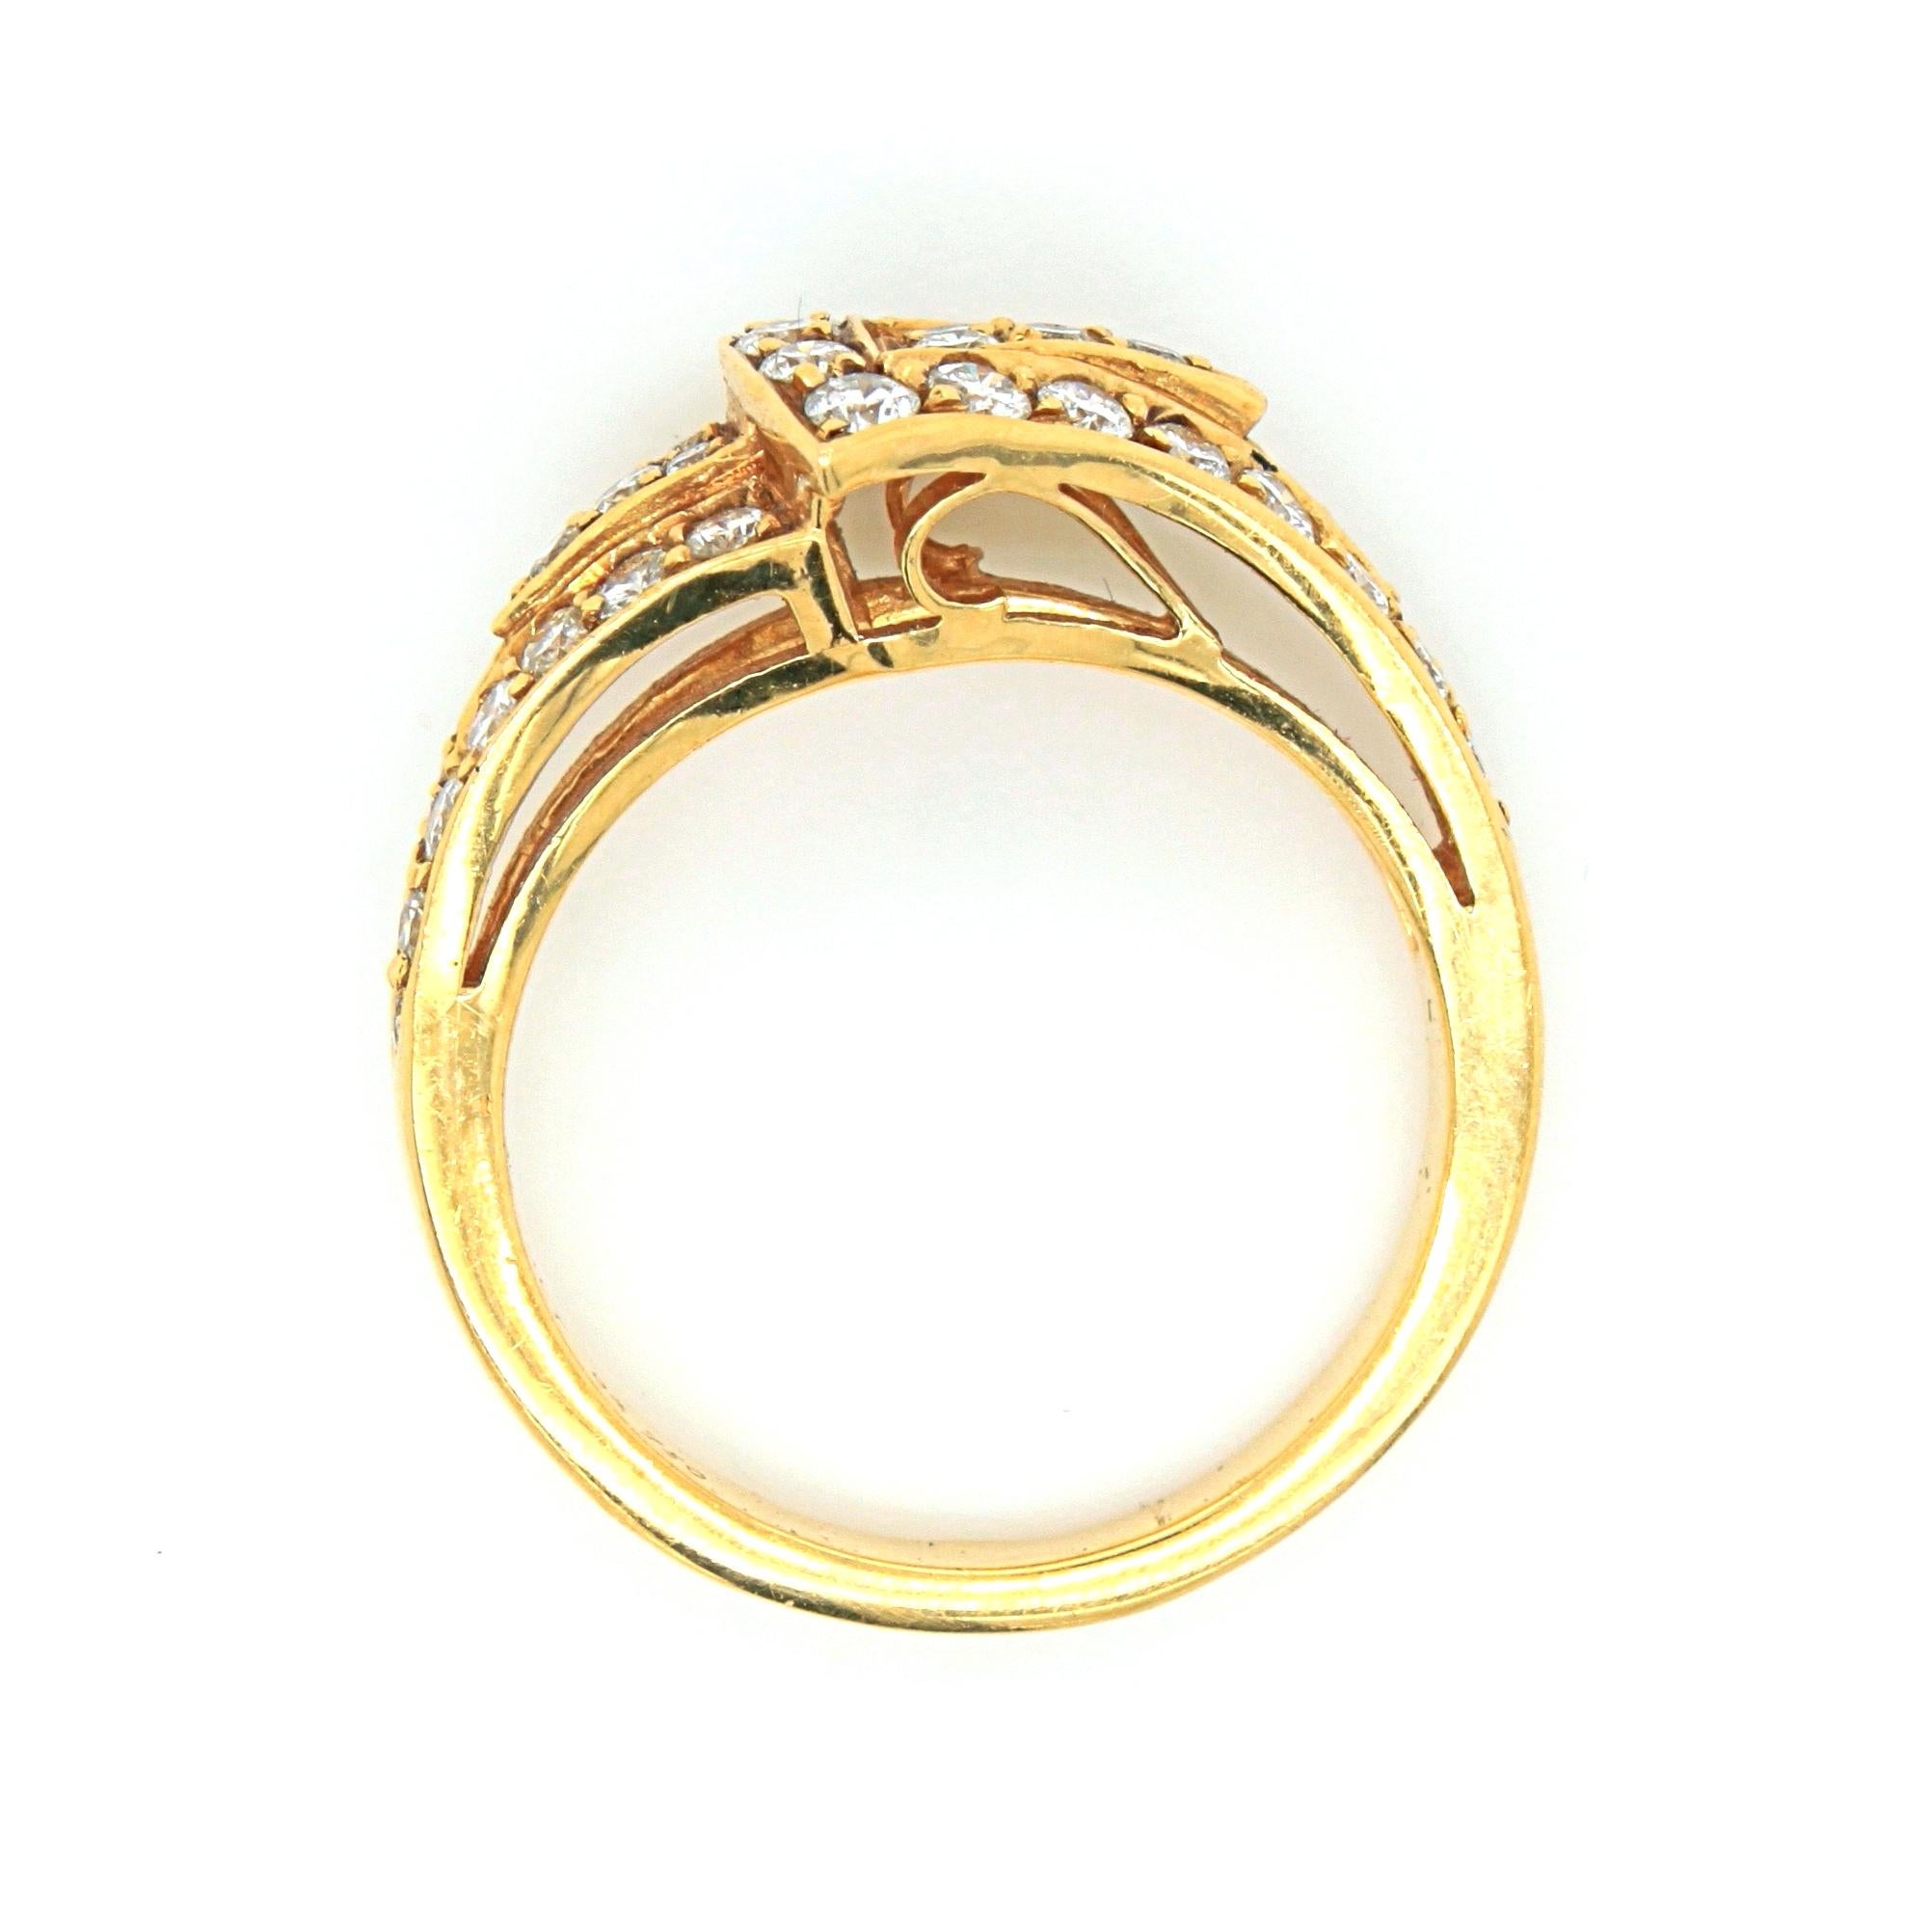 Geometric Diamond Ring in 18k Yellow Gold, by Chaumet, 20th Century 6